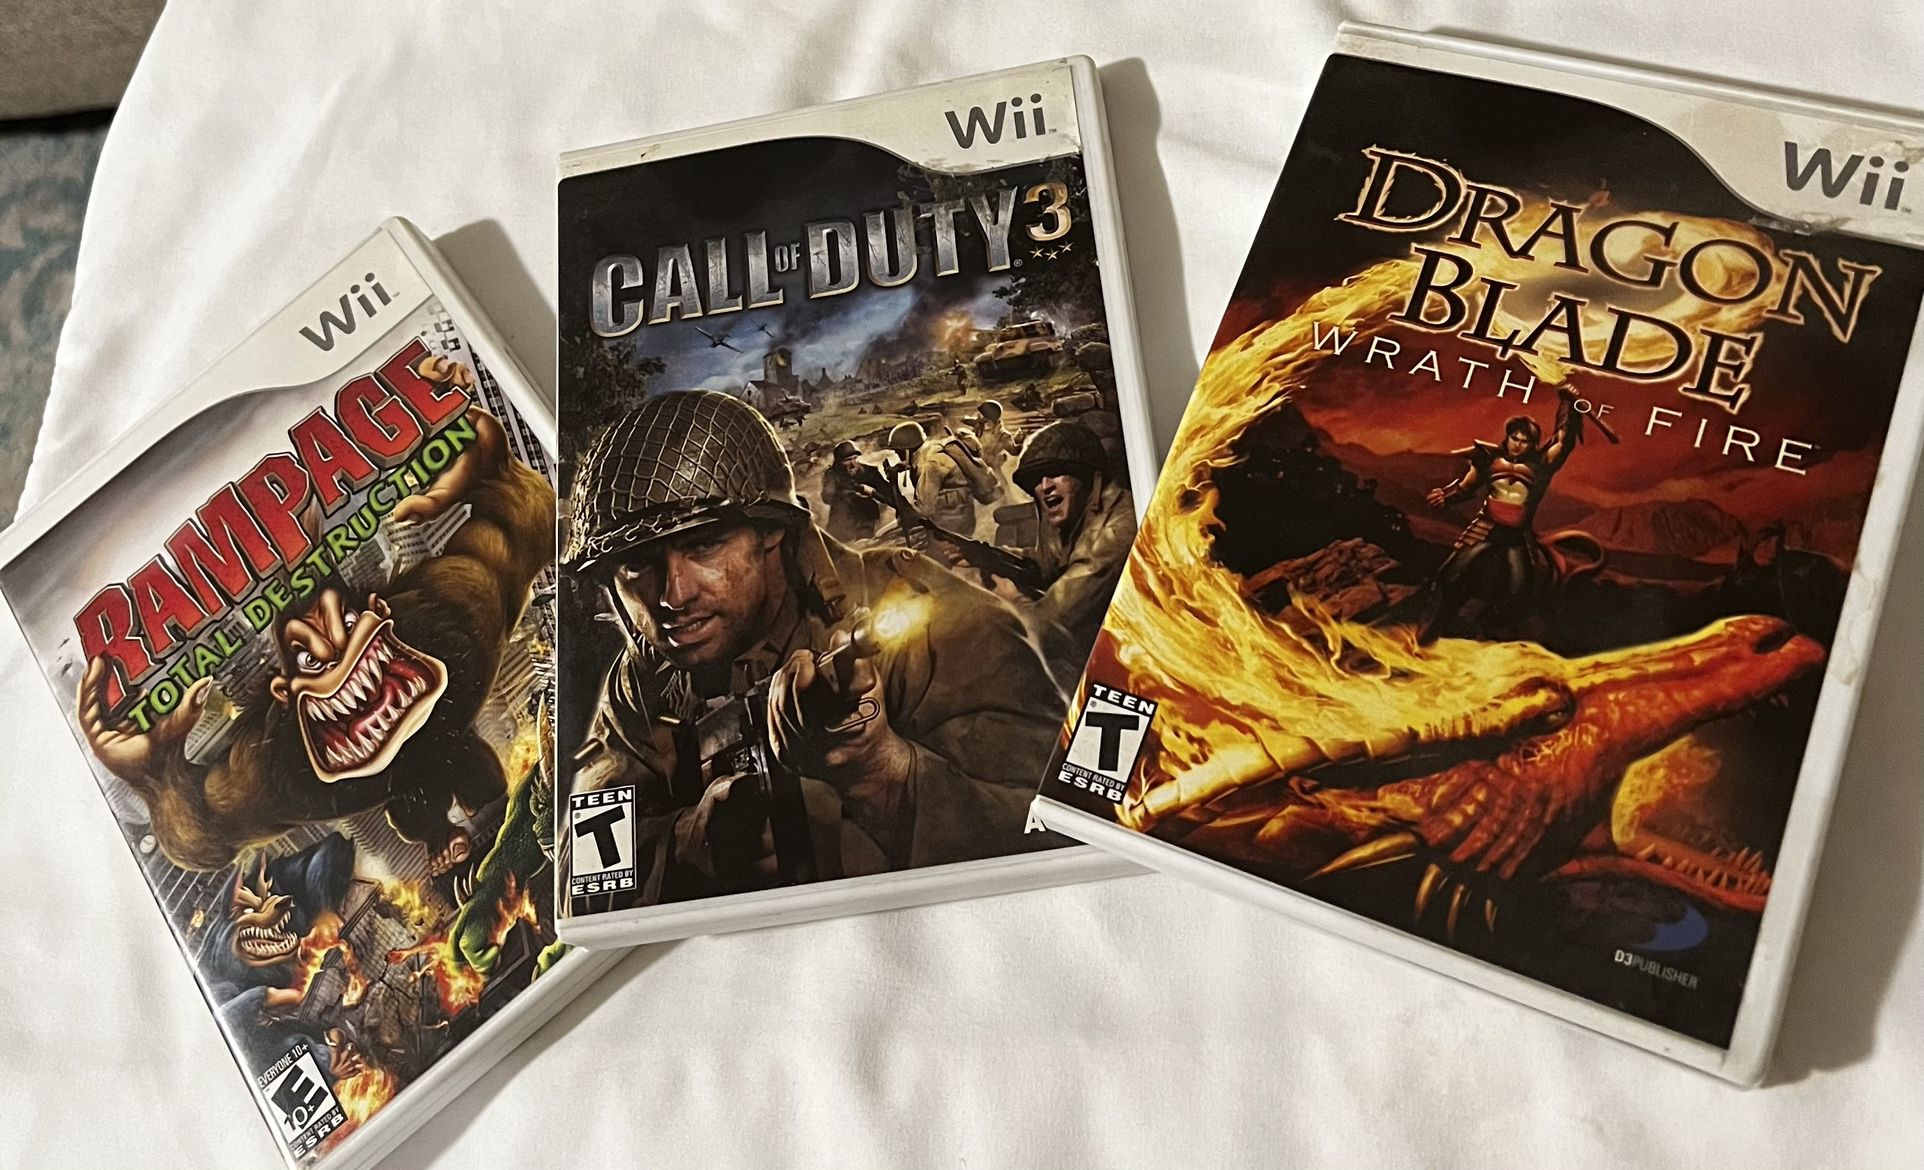 Wii Games Bundle: Dragon Blade Wrath of Fire, Call Of Duty 3